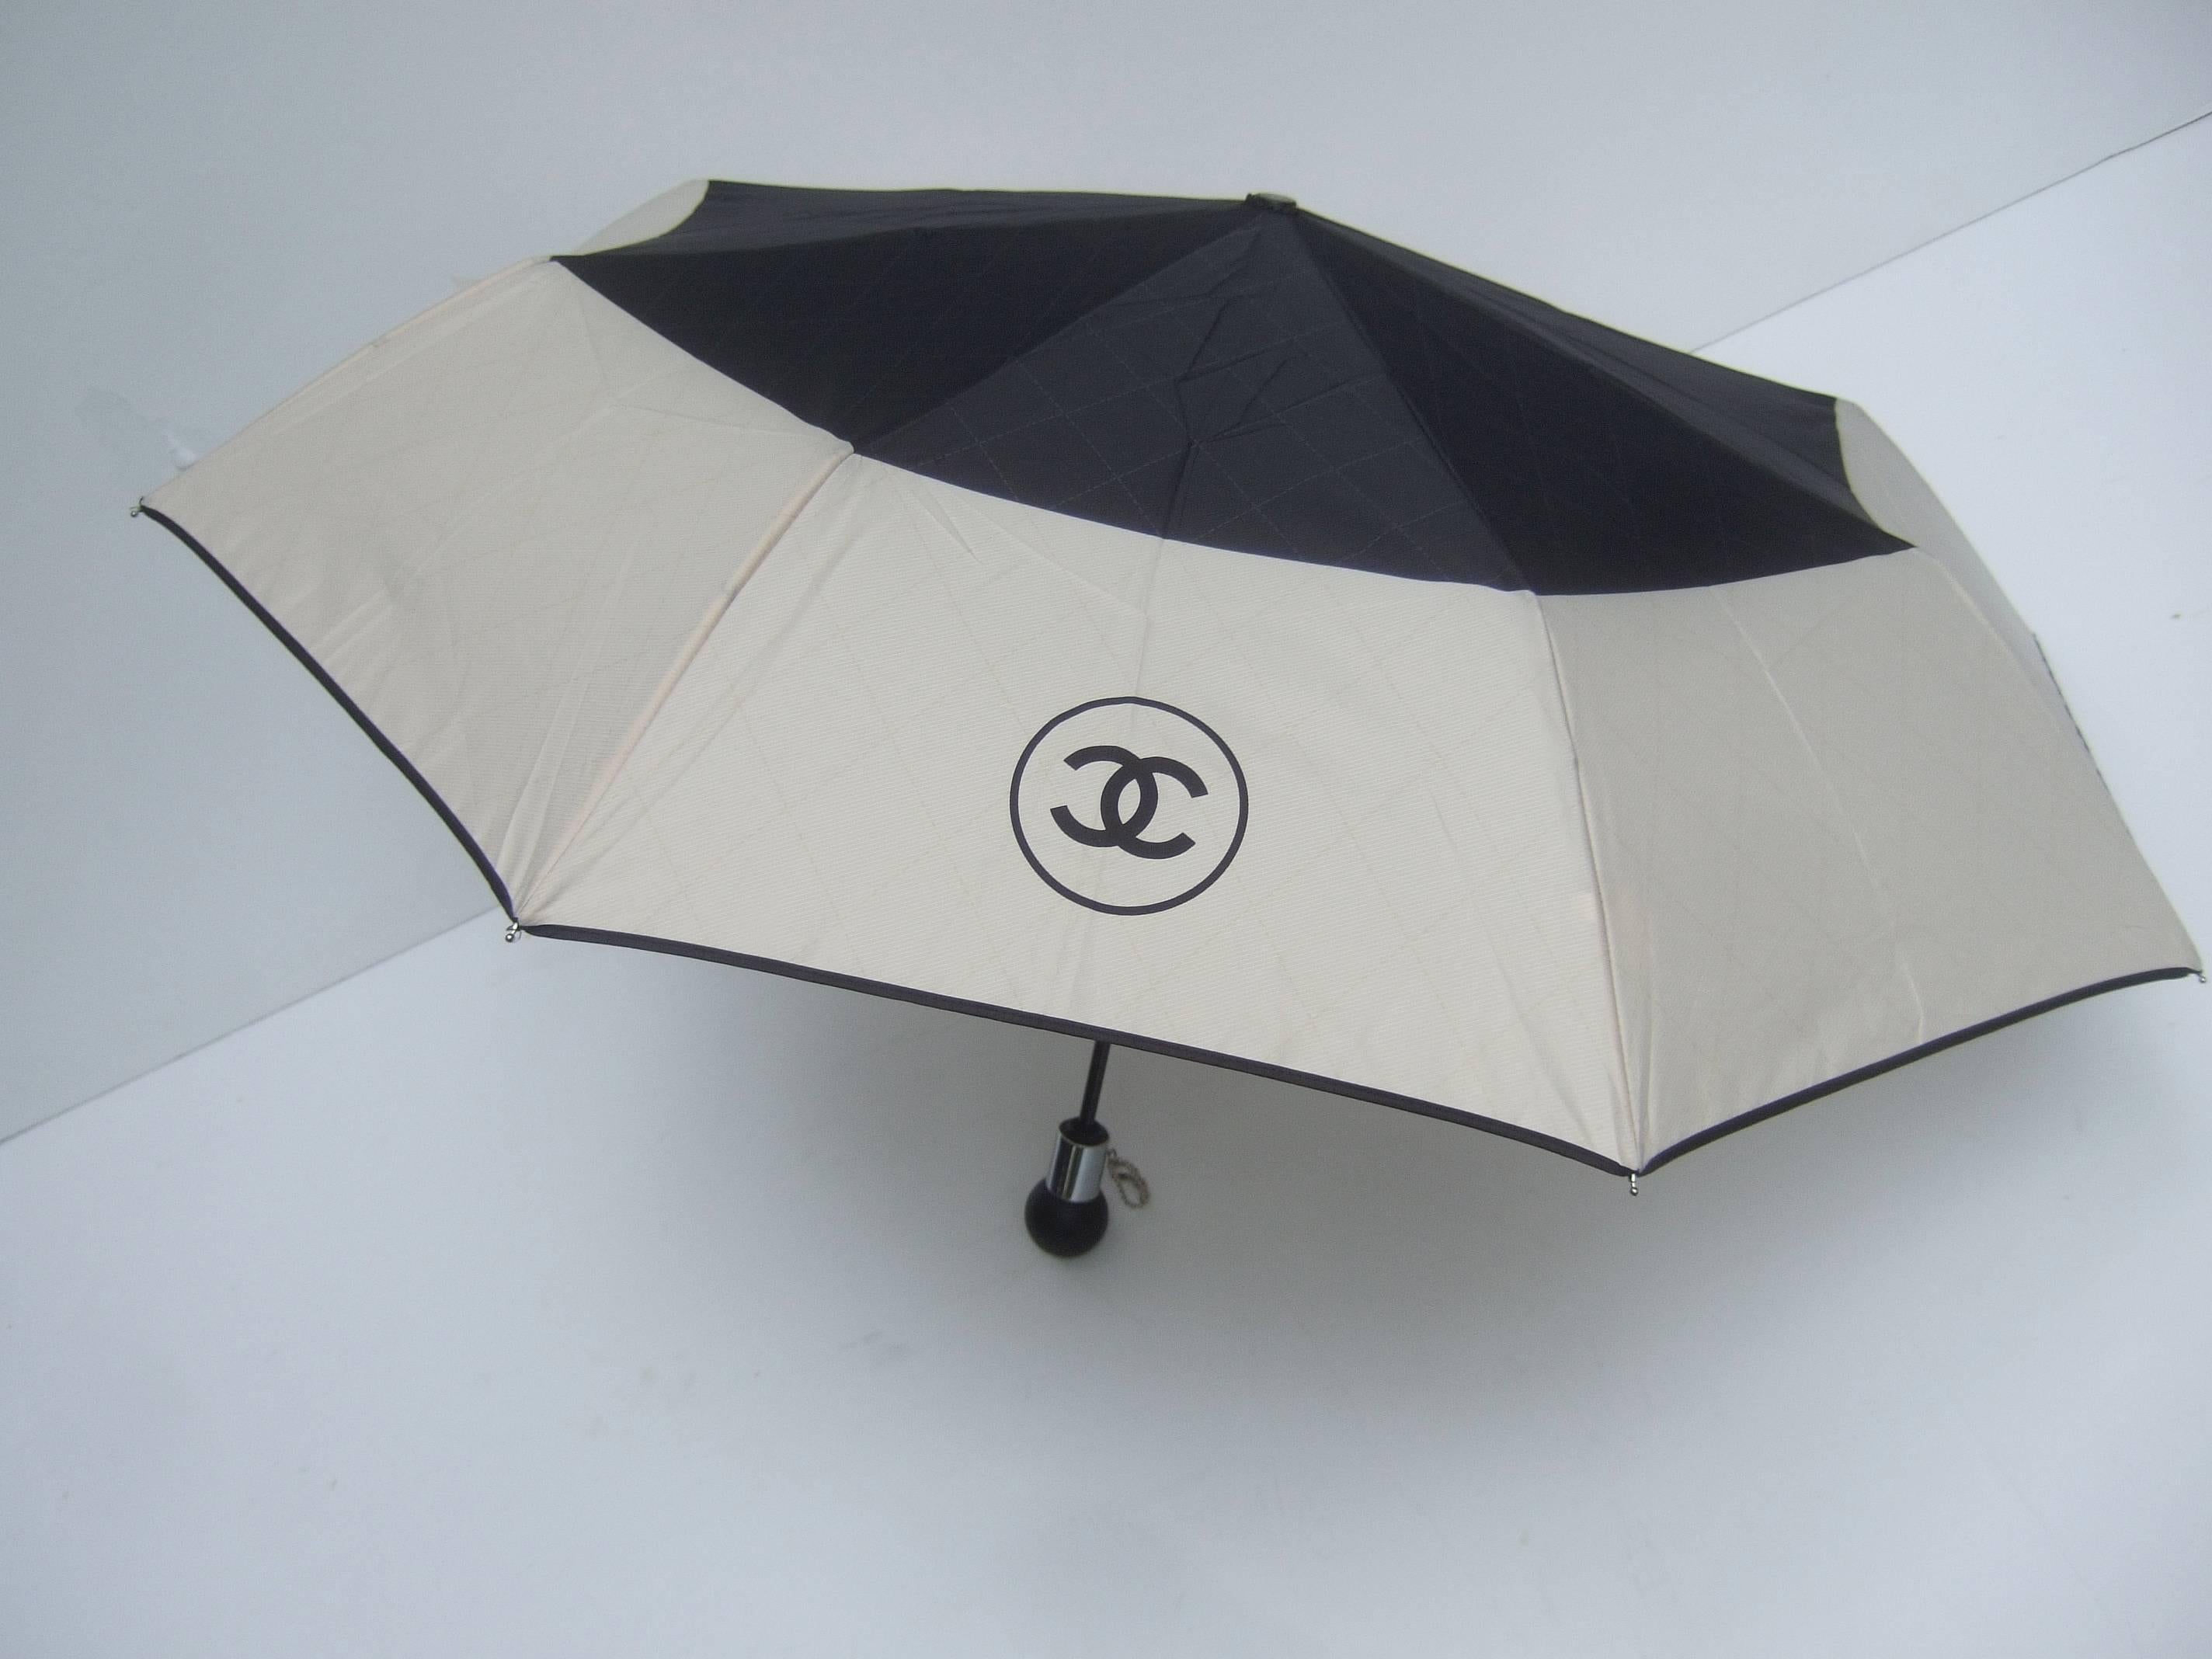 Chanel Stylish black and tan nylon umbrella in Chanel Box
The chic umbrella comes with a quilted nylon cylinder 
carrying case. The quilted case has a silver metal C.C.
initial zipper pull charm

The umbrella's center section is black nylon